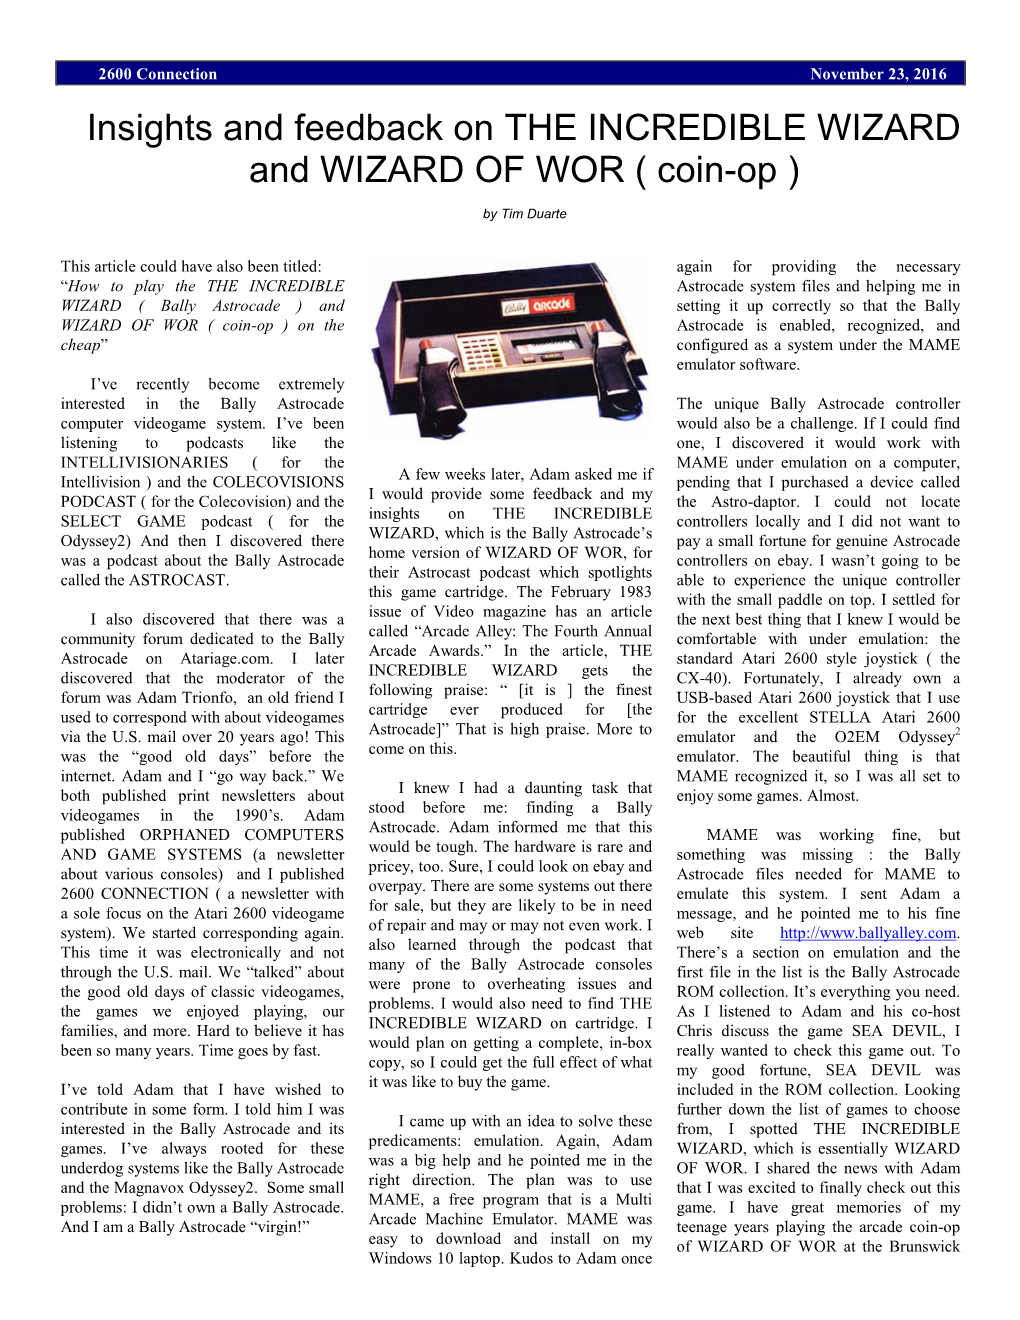 Insights and Feedback on the INCREDIBLE WIZARD and WIZARD of WOR ( Coin-Op )